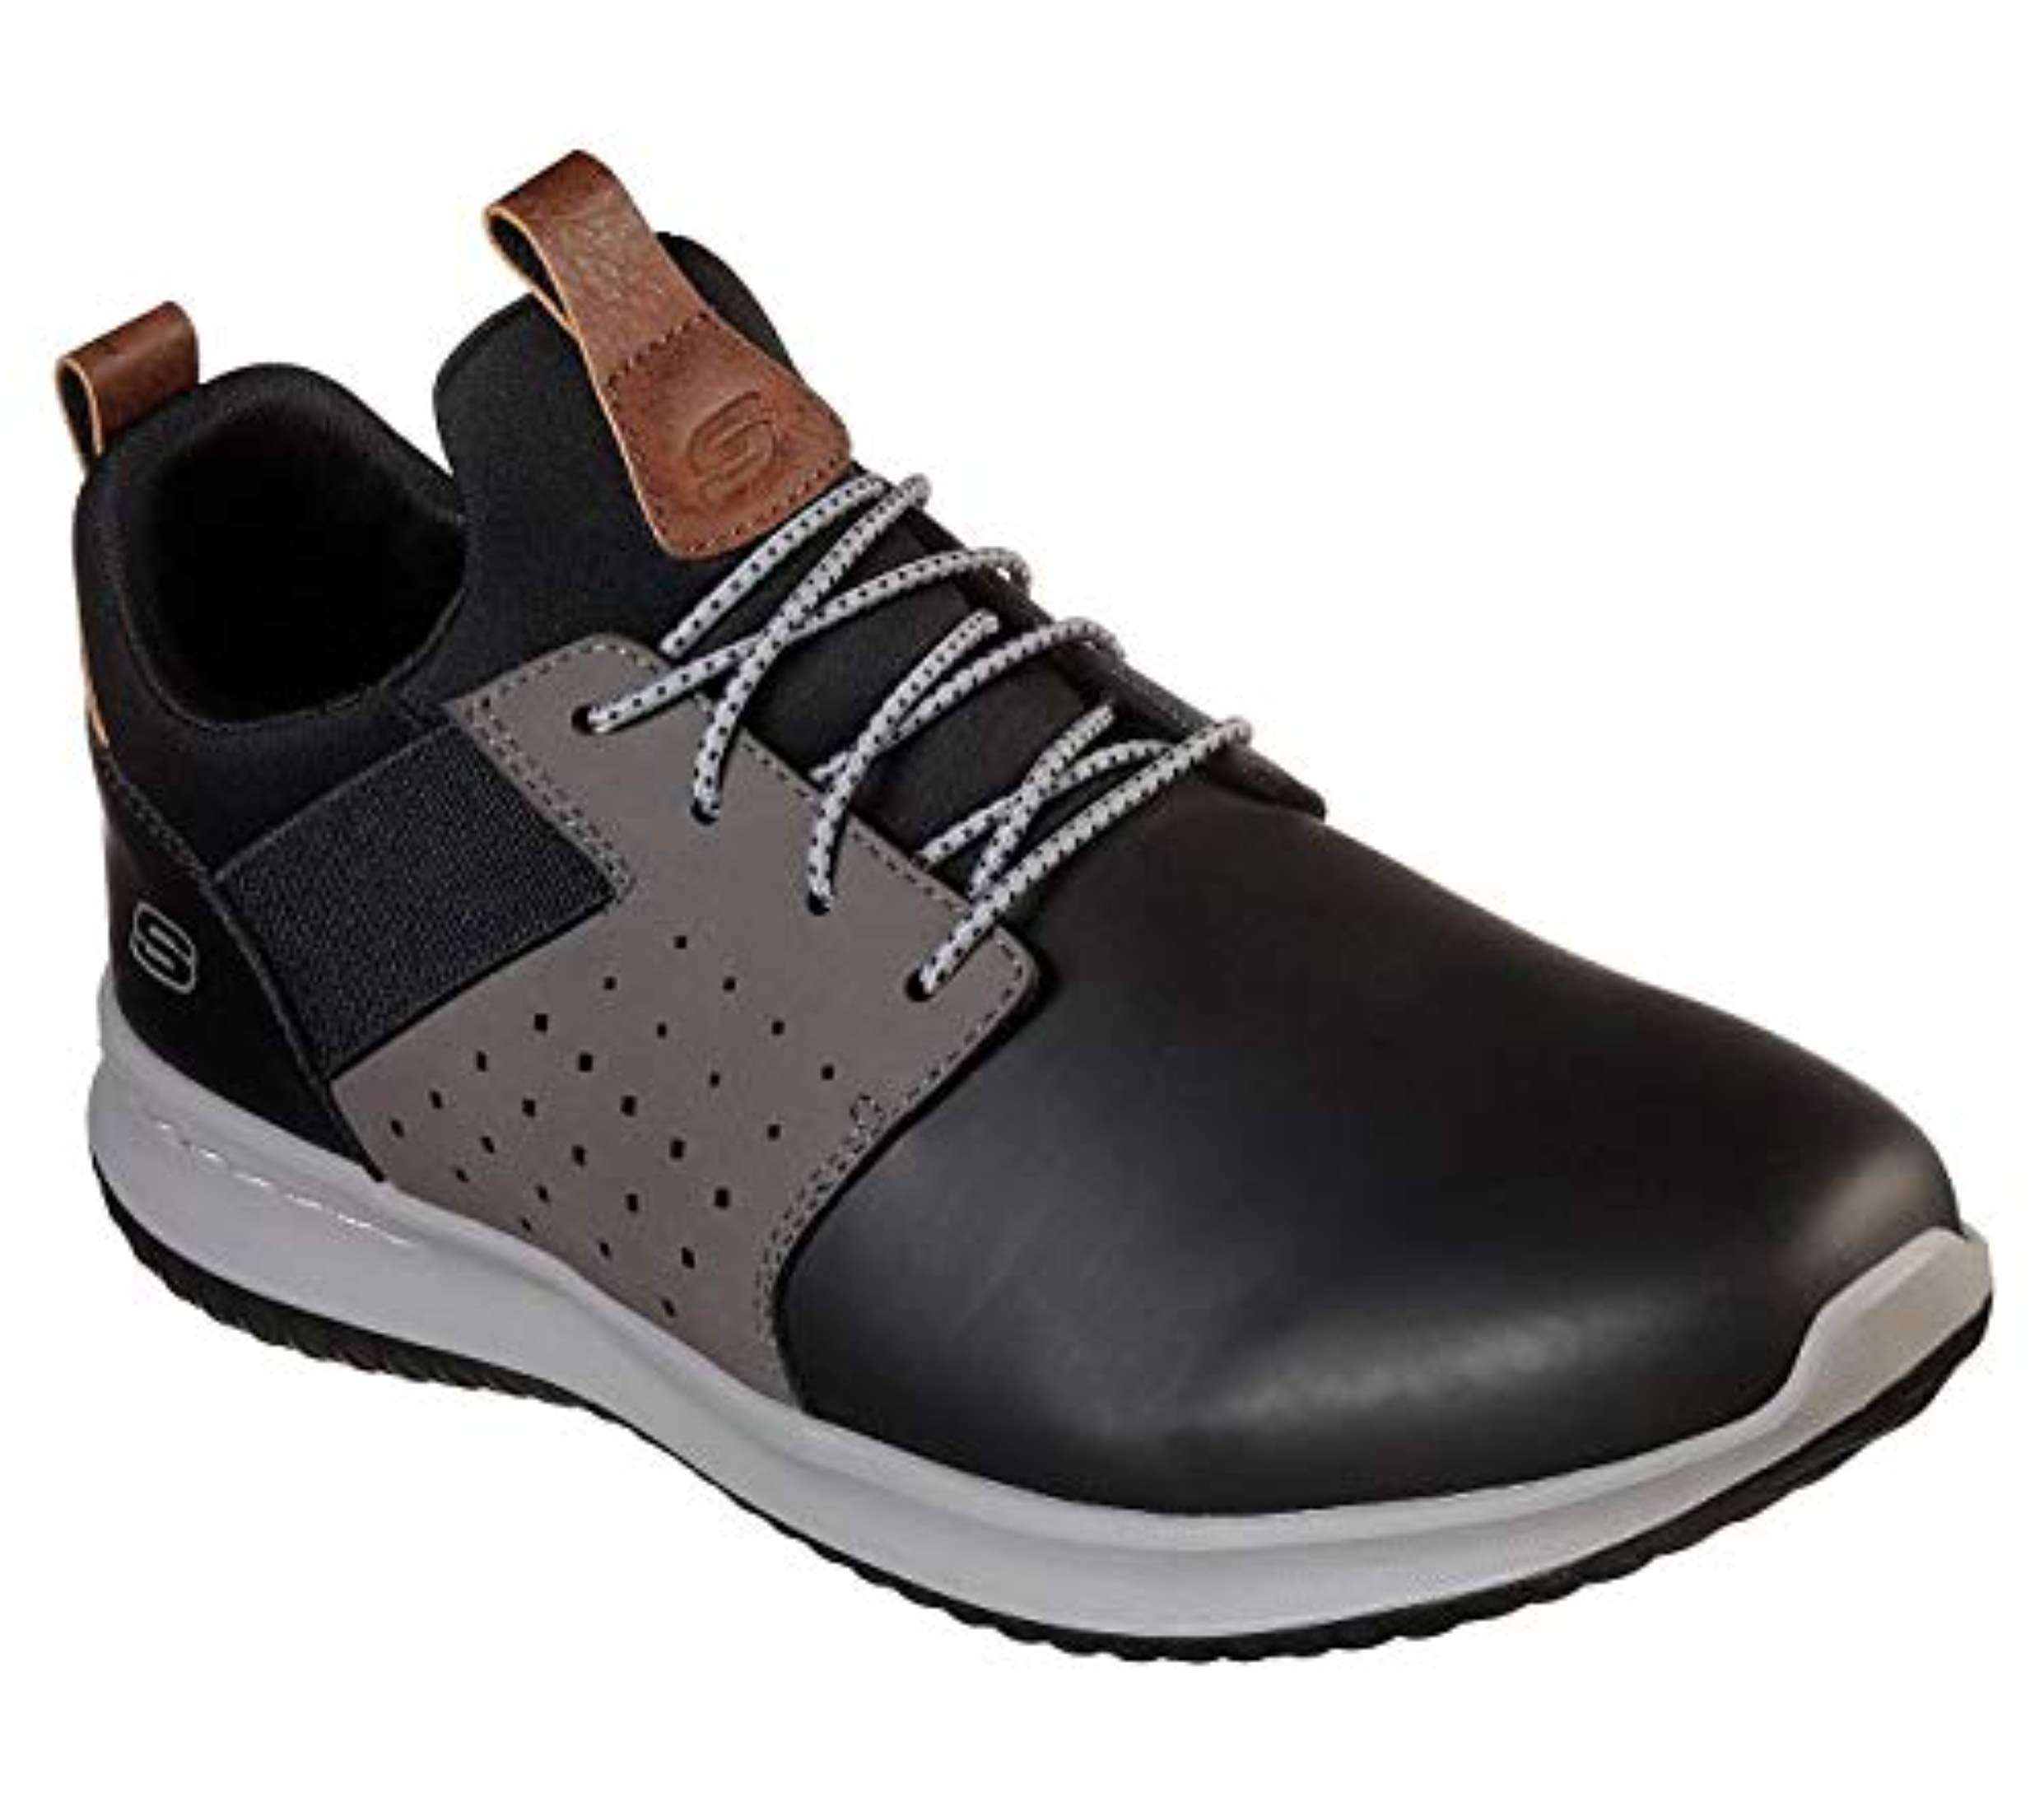 skechers casual black shoes